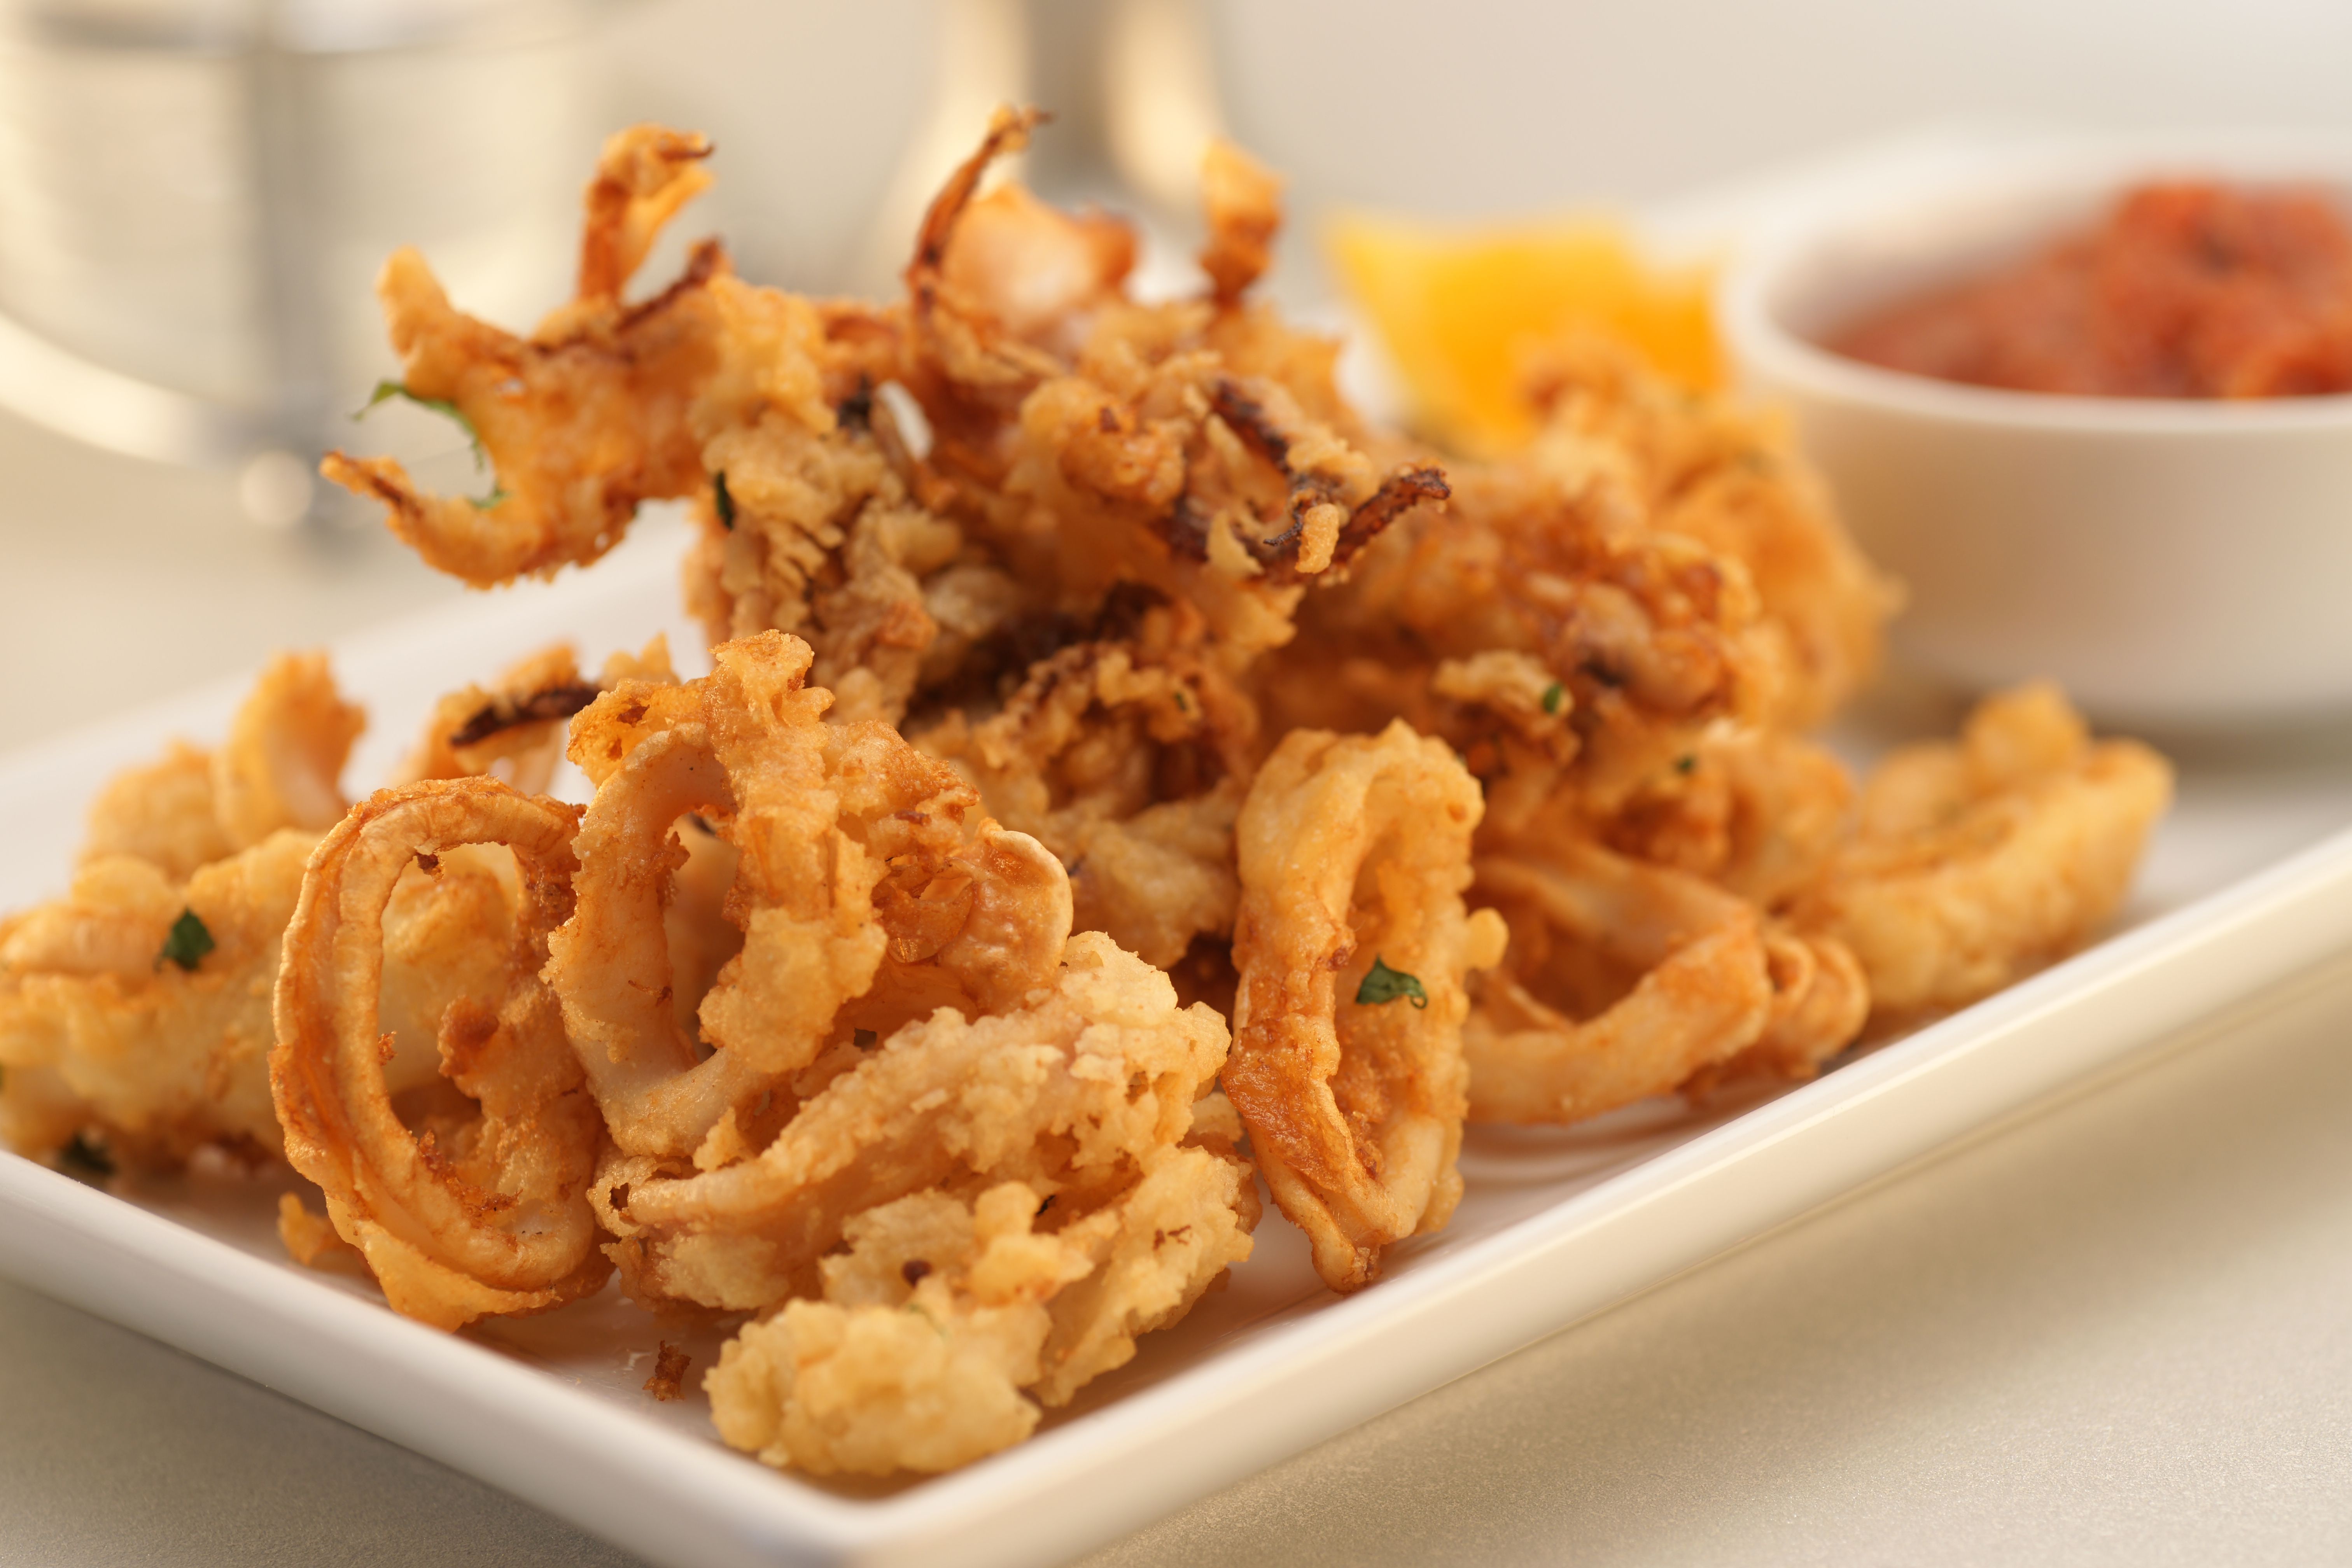 What Is Calamari Made Out of?